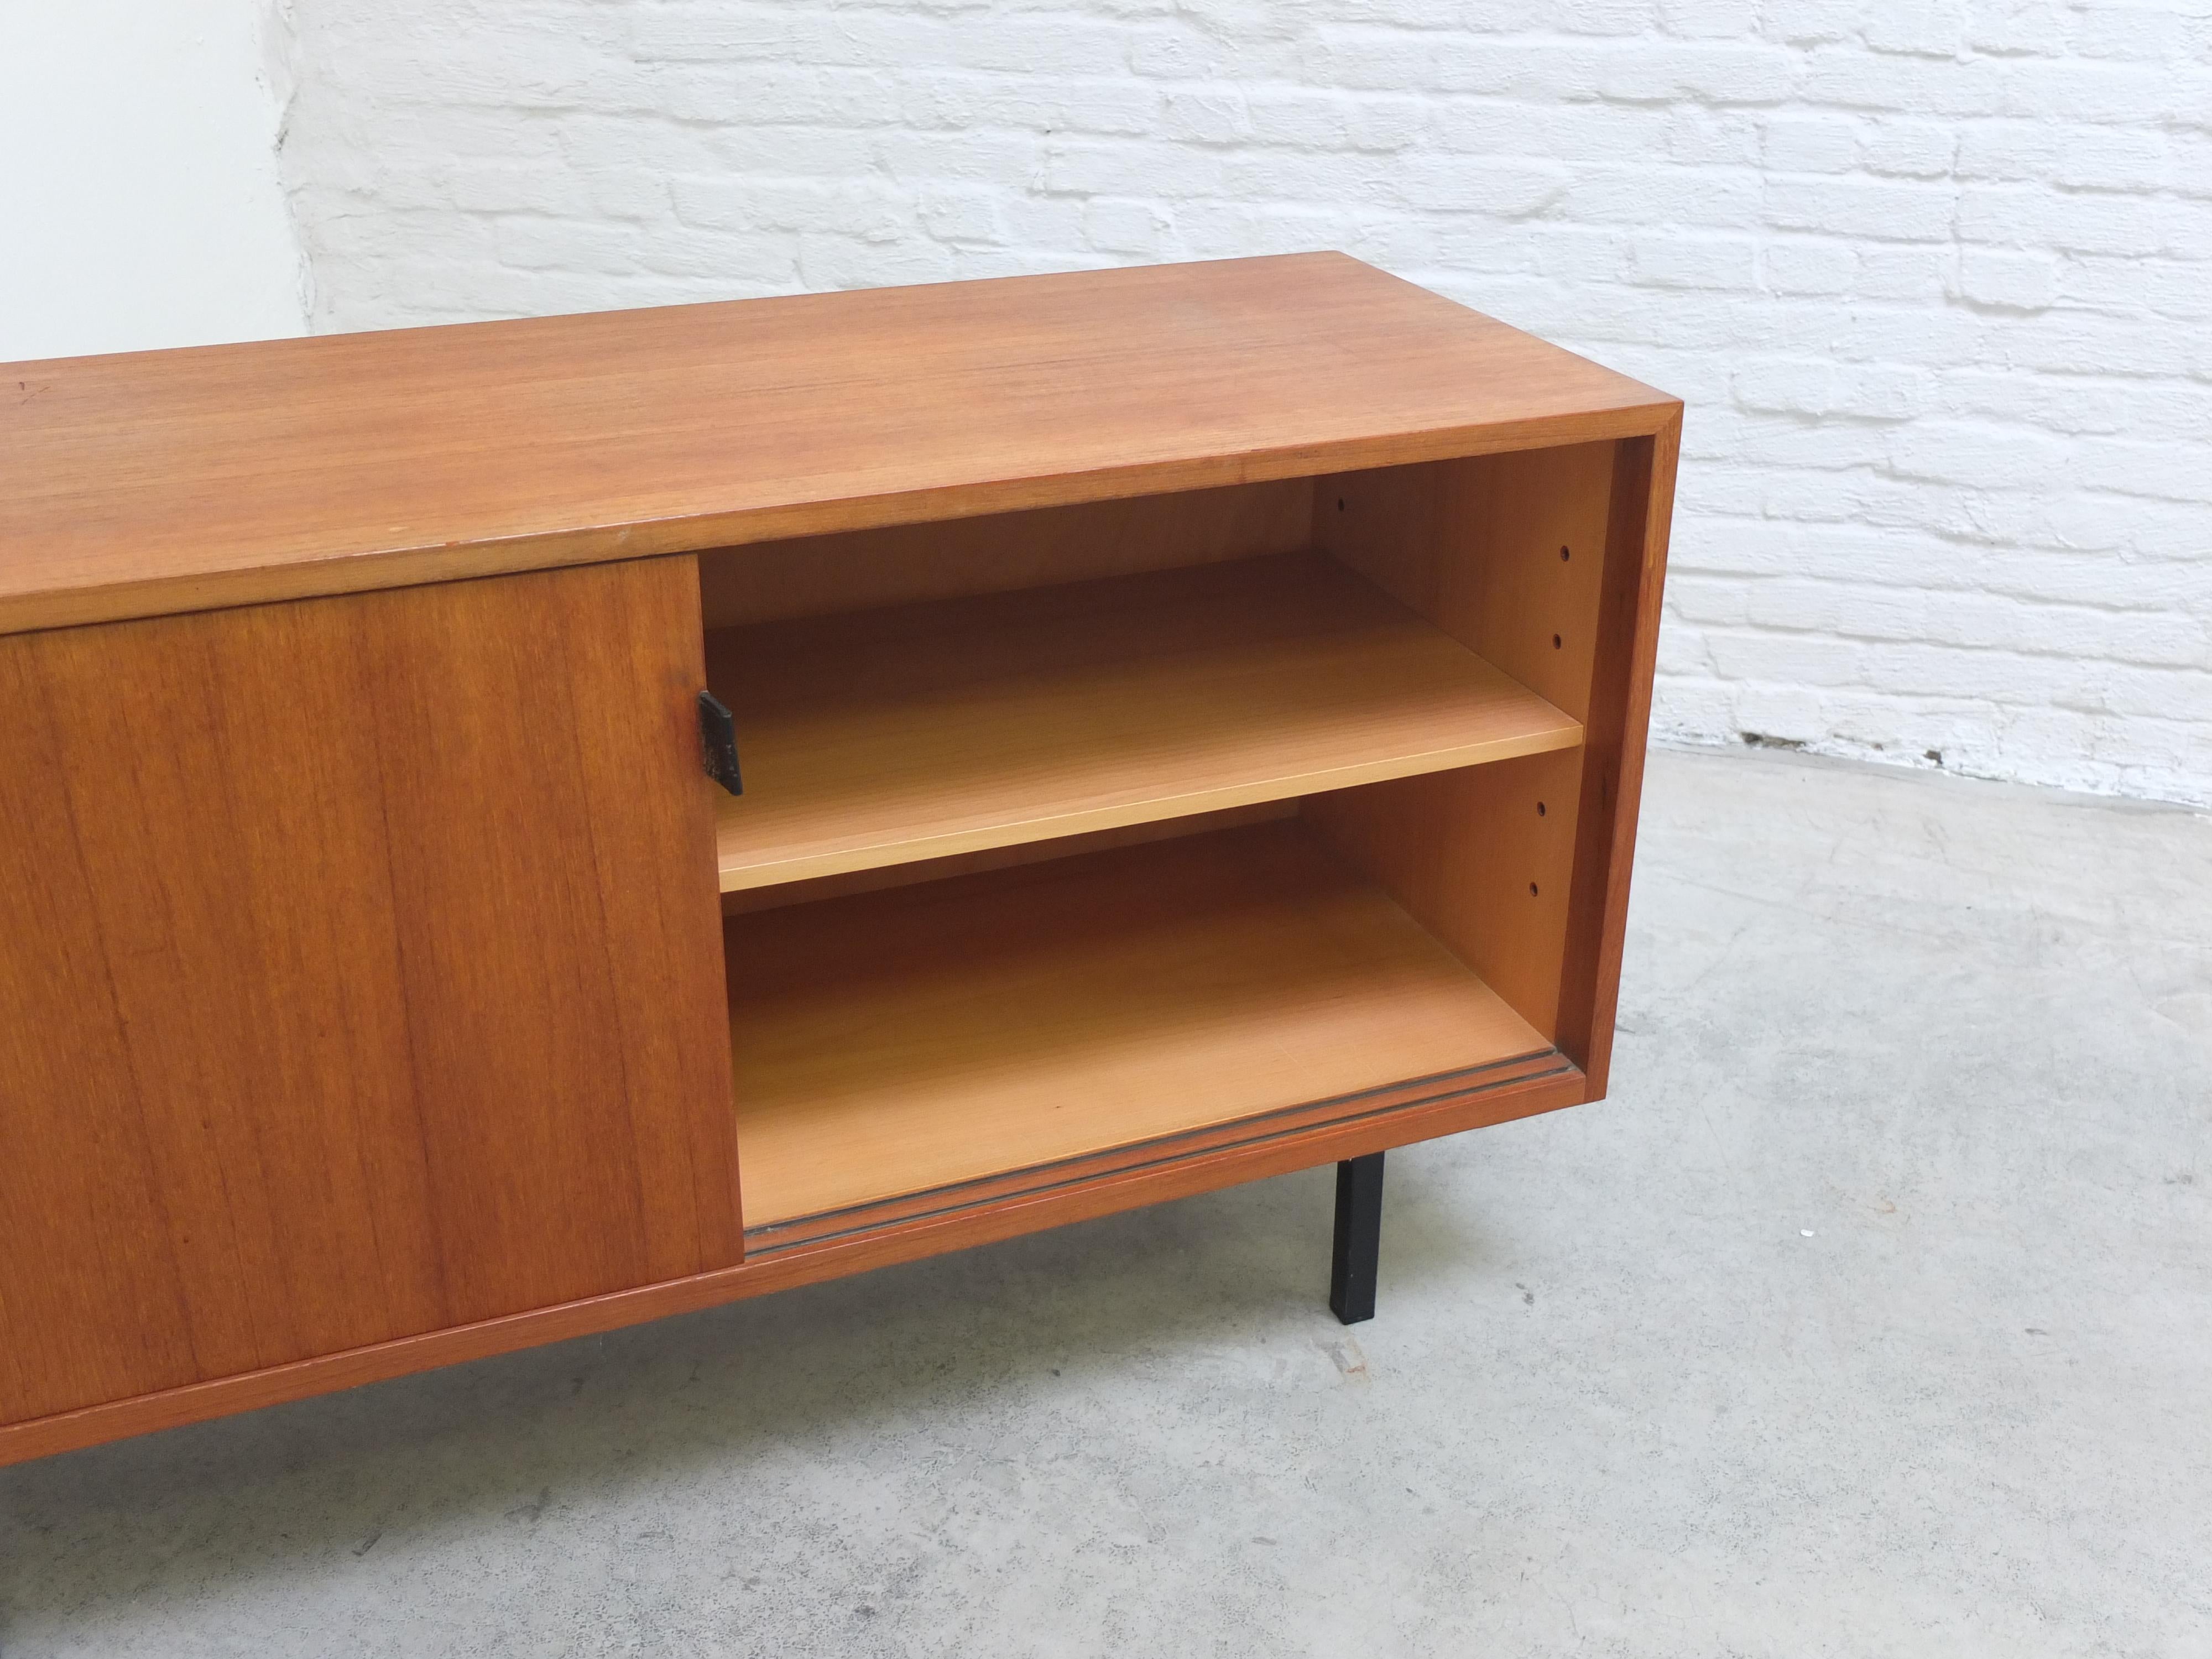 Small Modernist Sideboard by Florence Knoll for Knoll International, 1960s For Sale 1